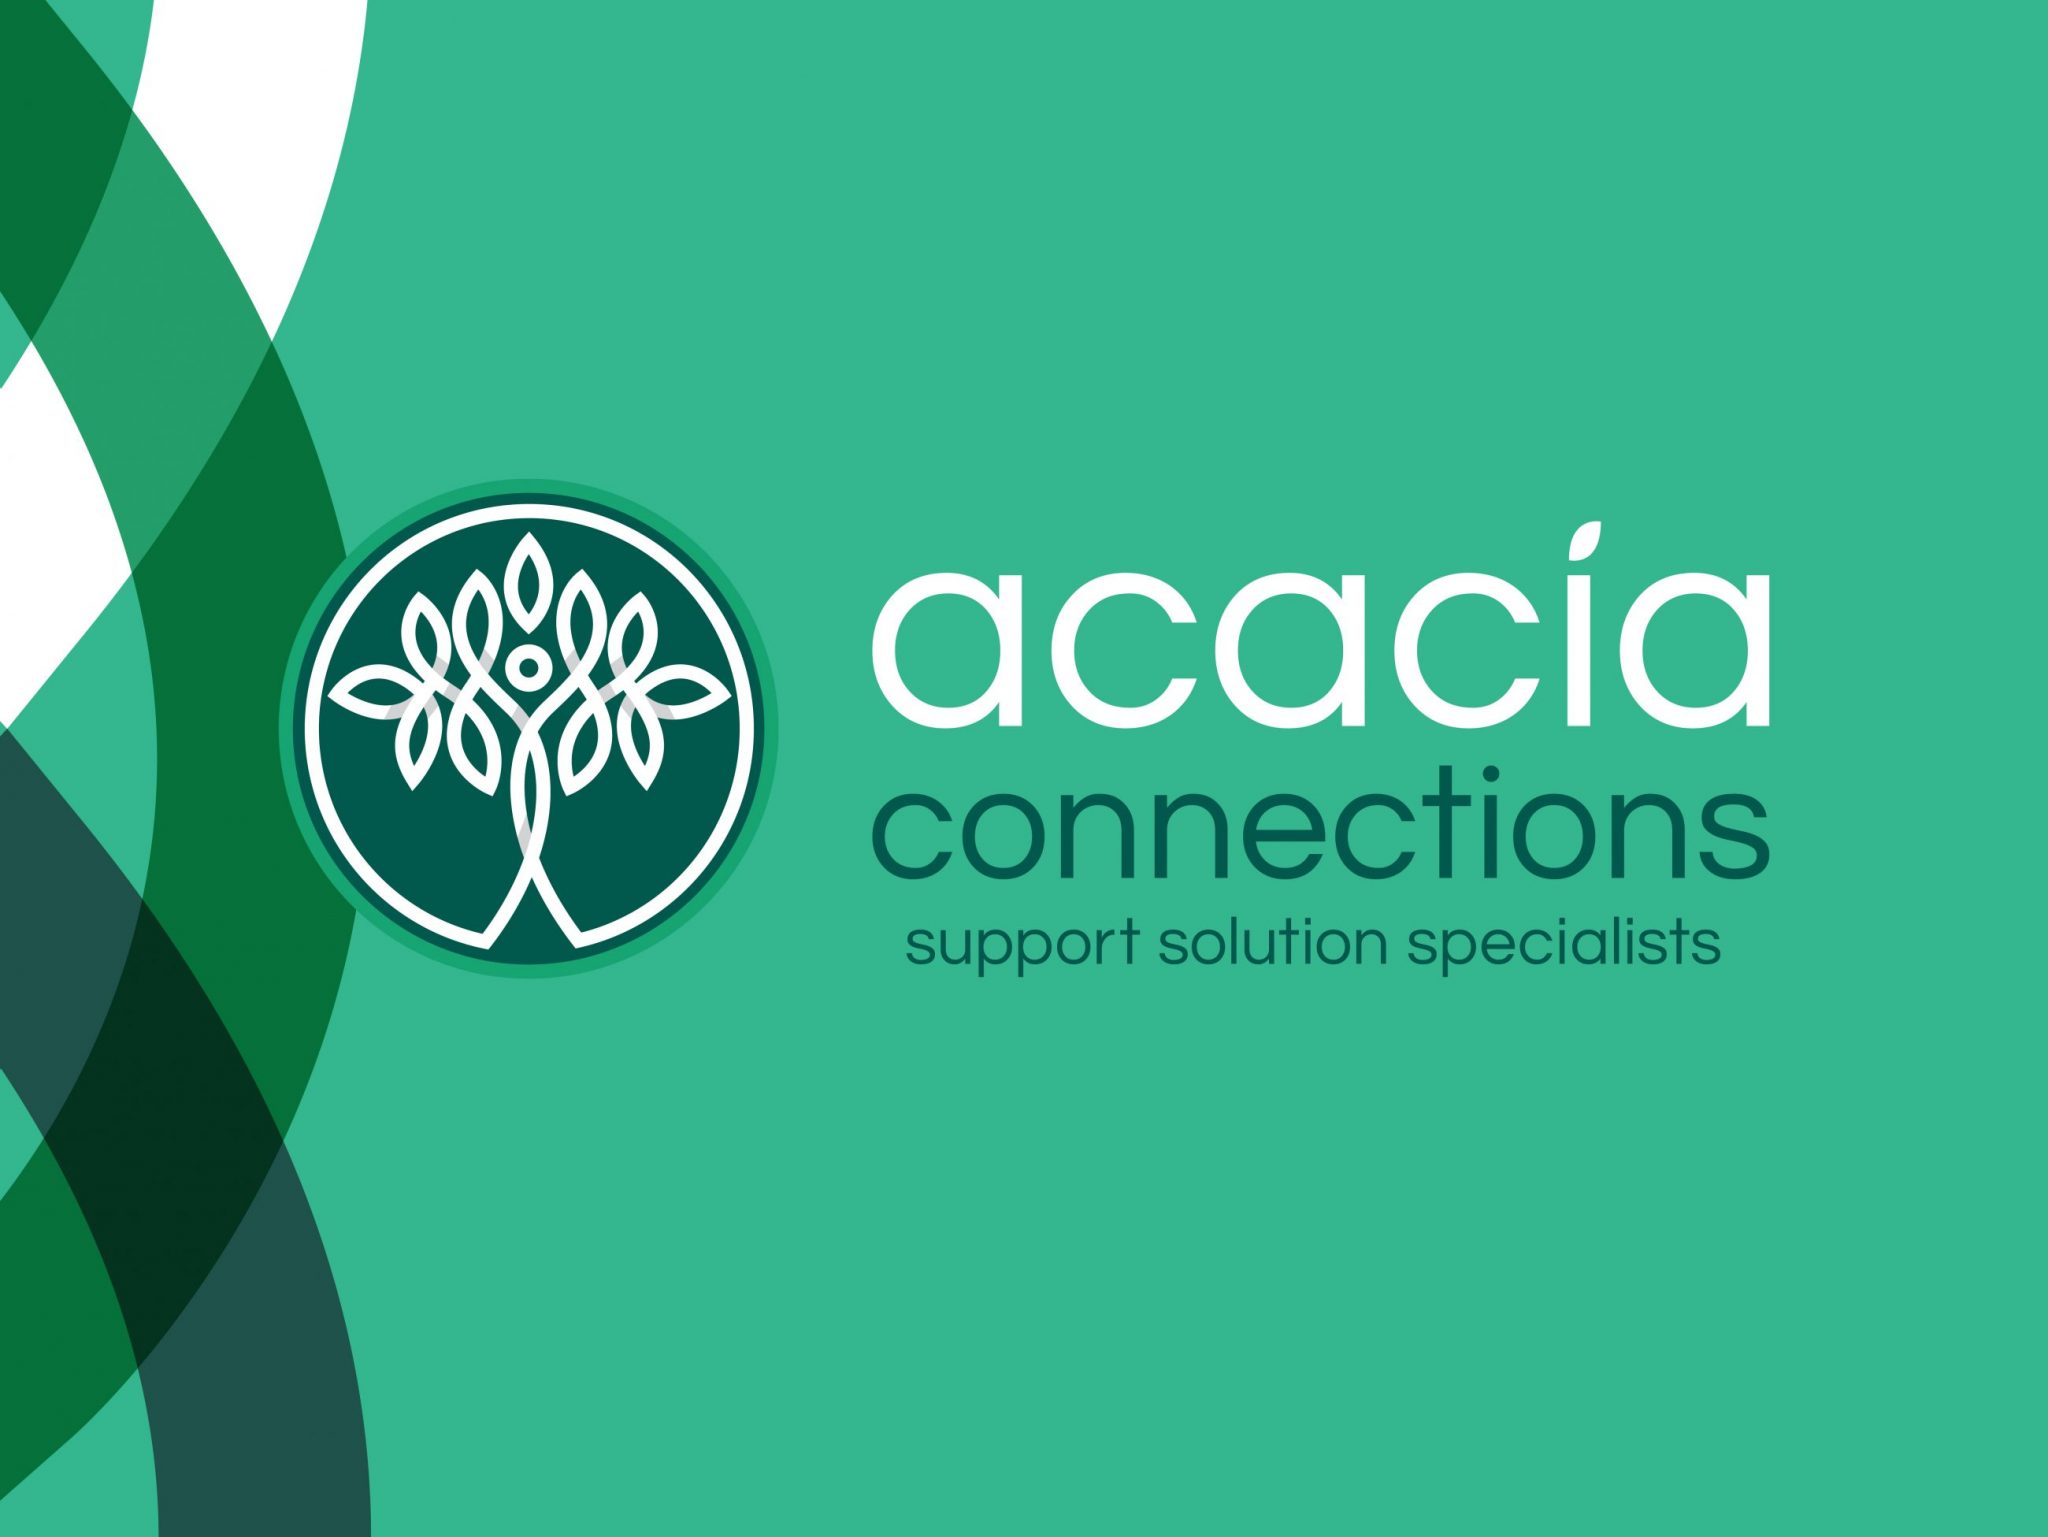 Acacia Connections new brand identity and structured brand architecture